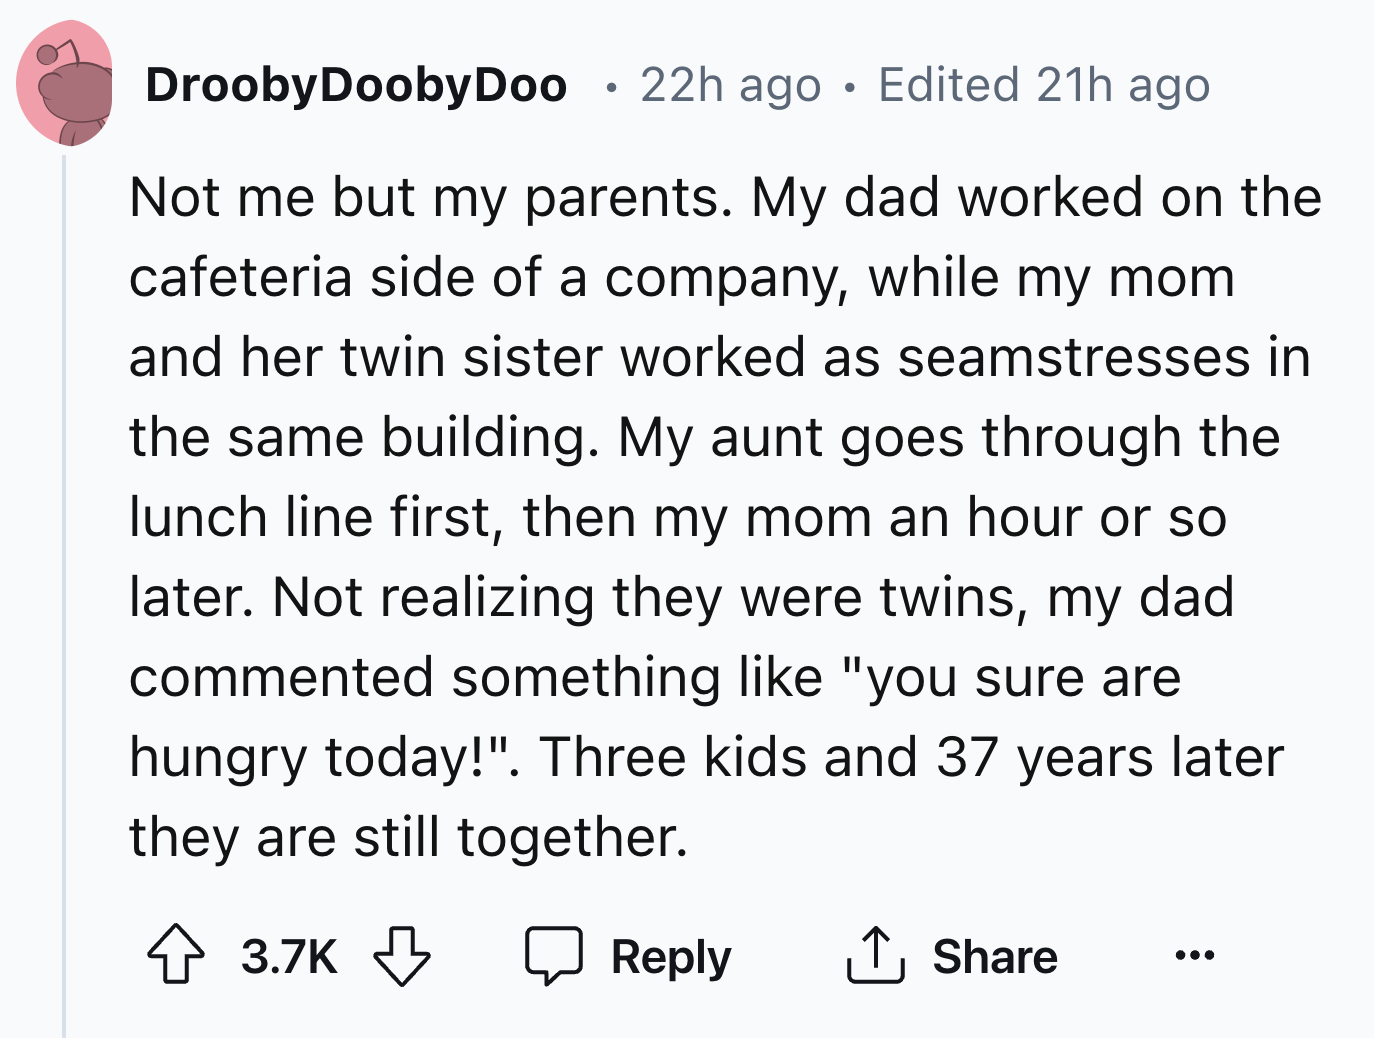 number - Drooby Dooby Doo . 22h ago Edited 21h ago Not me but my parents. My dad worked on the cafeteria side of a company, while my mom and her twin sister worked as seamstresses in the same building. My aunt goes through the lunch line first, then my mo